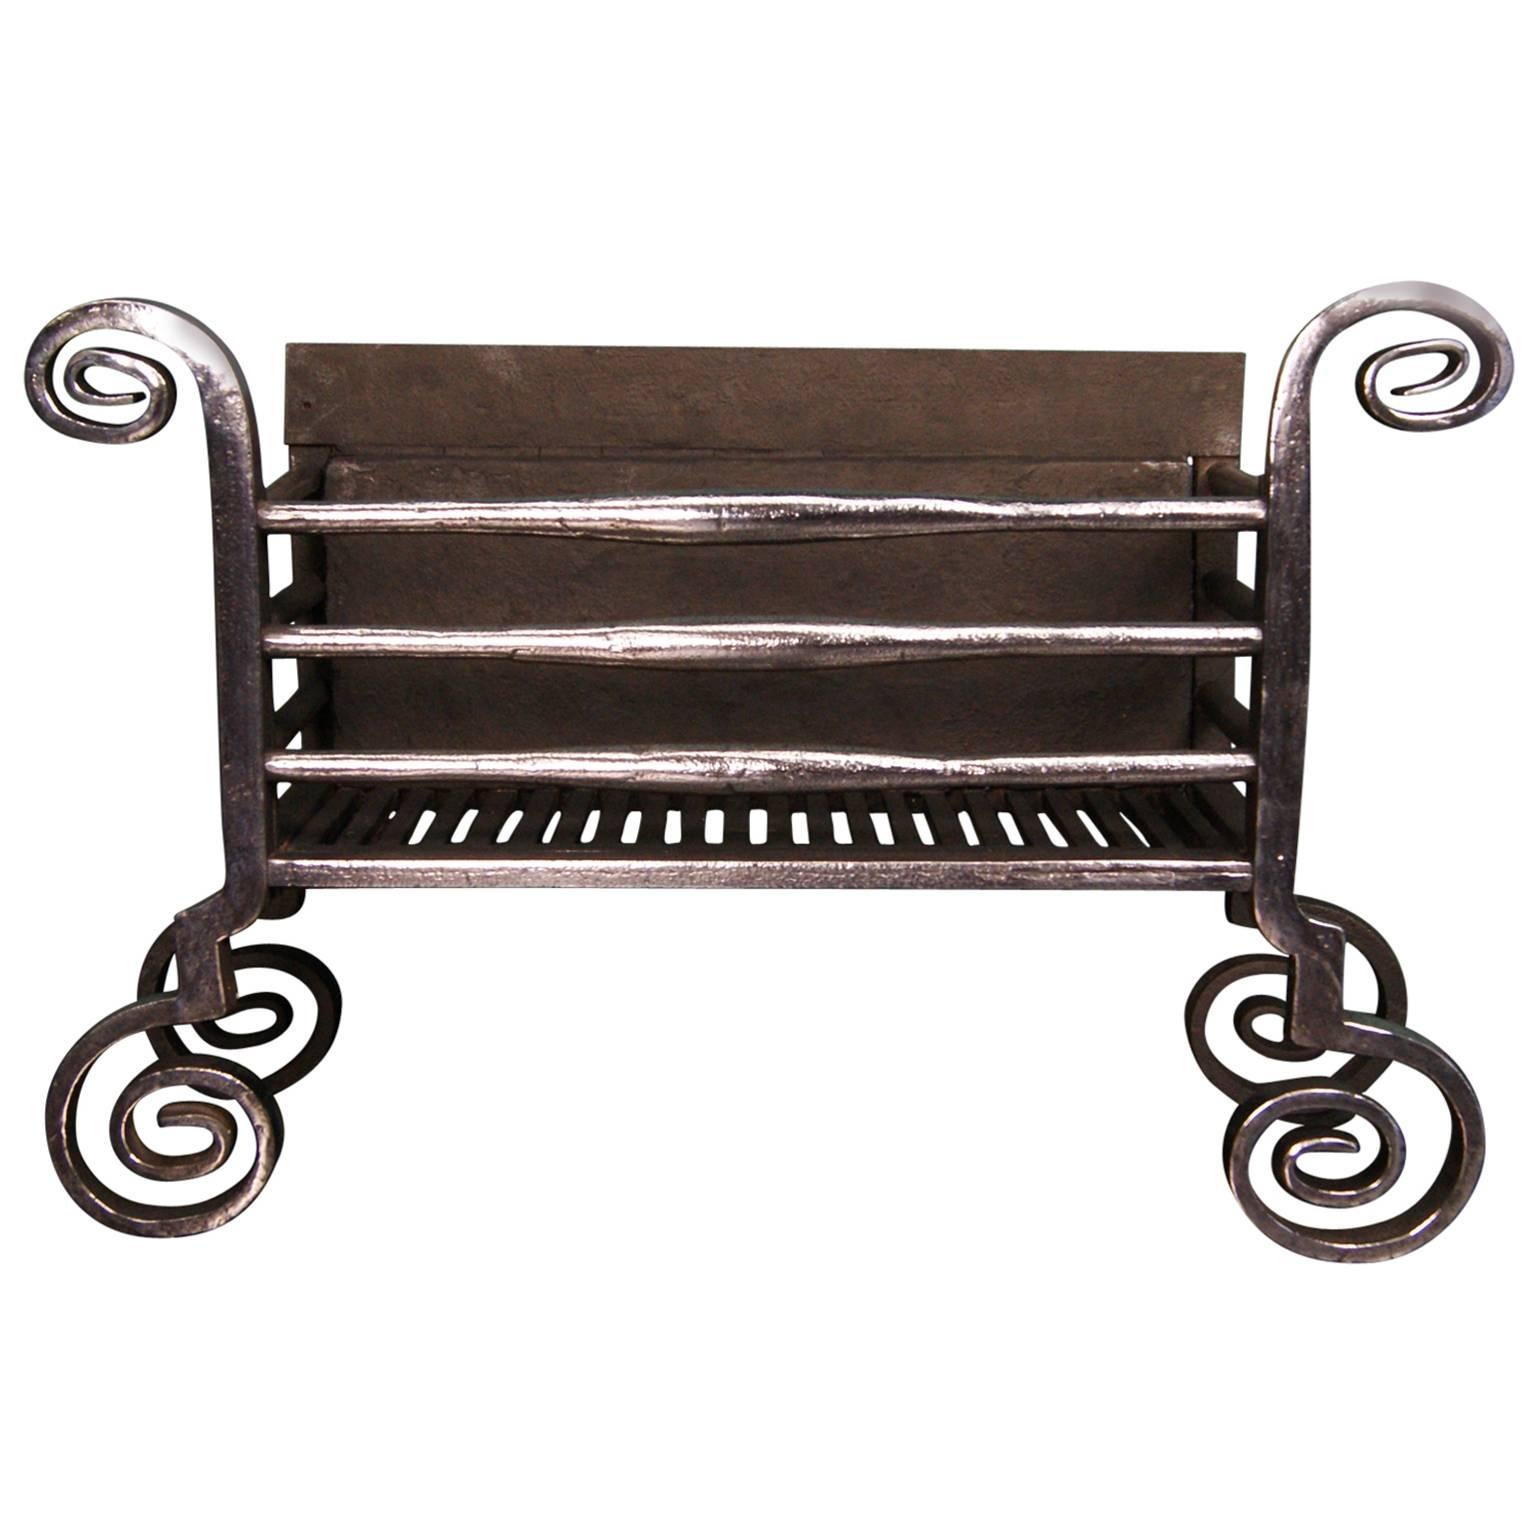 Large Polished Wrought Fire Basket Fire Grate For Sale